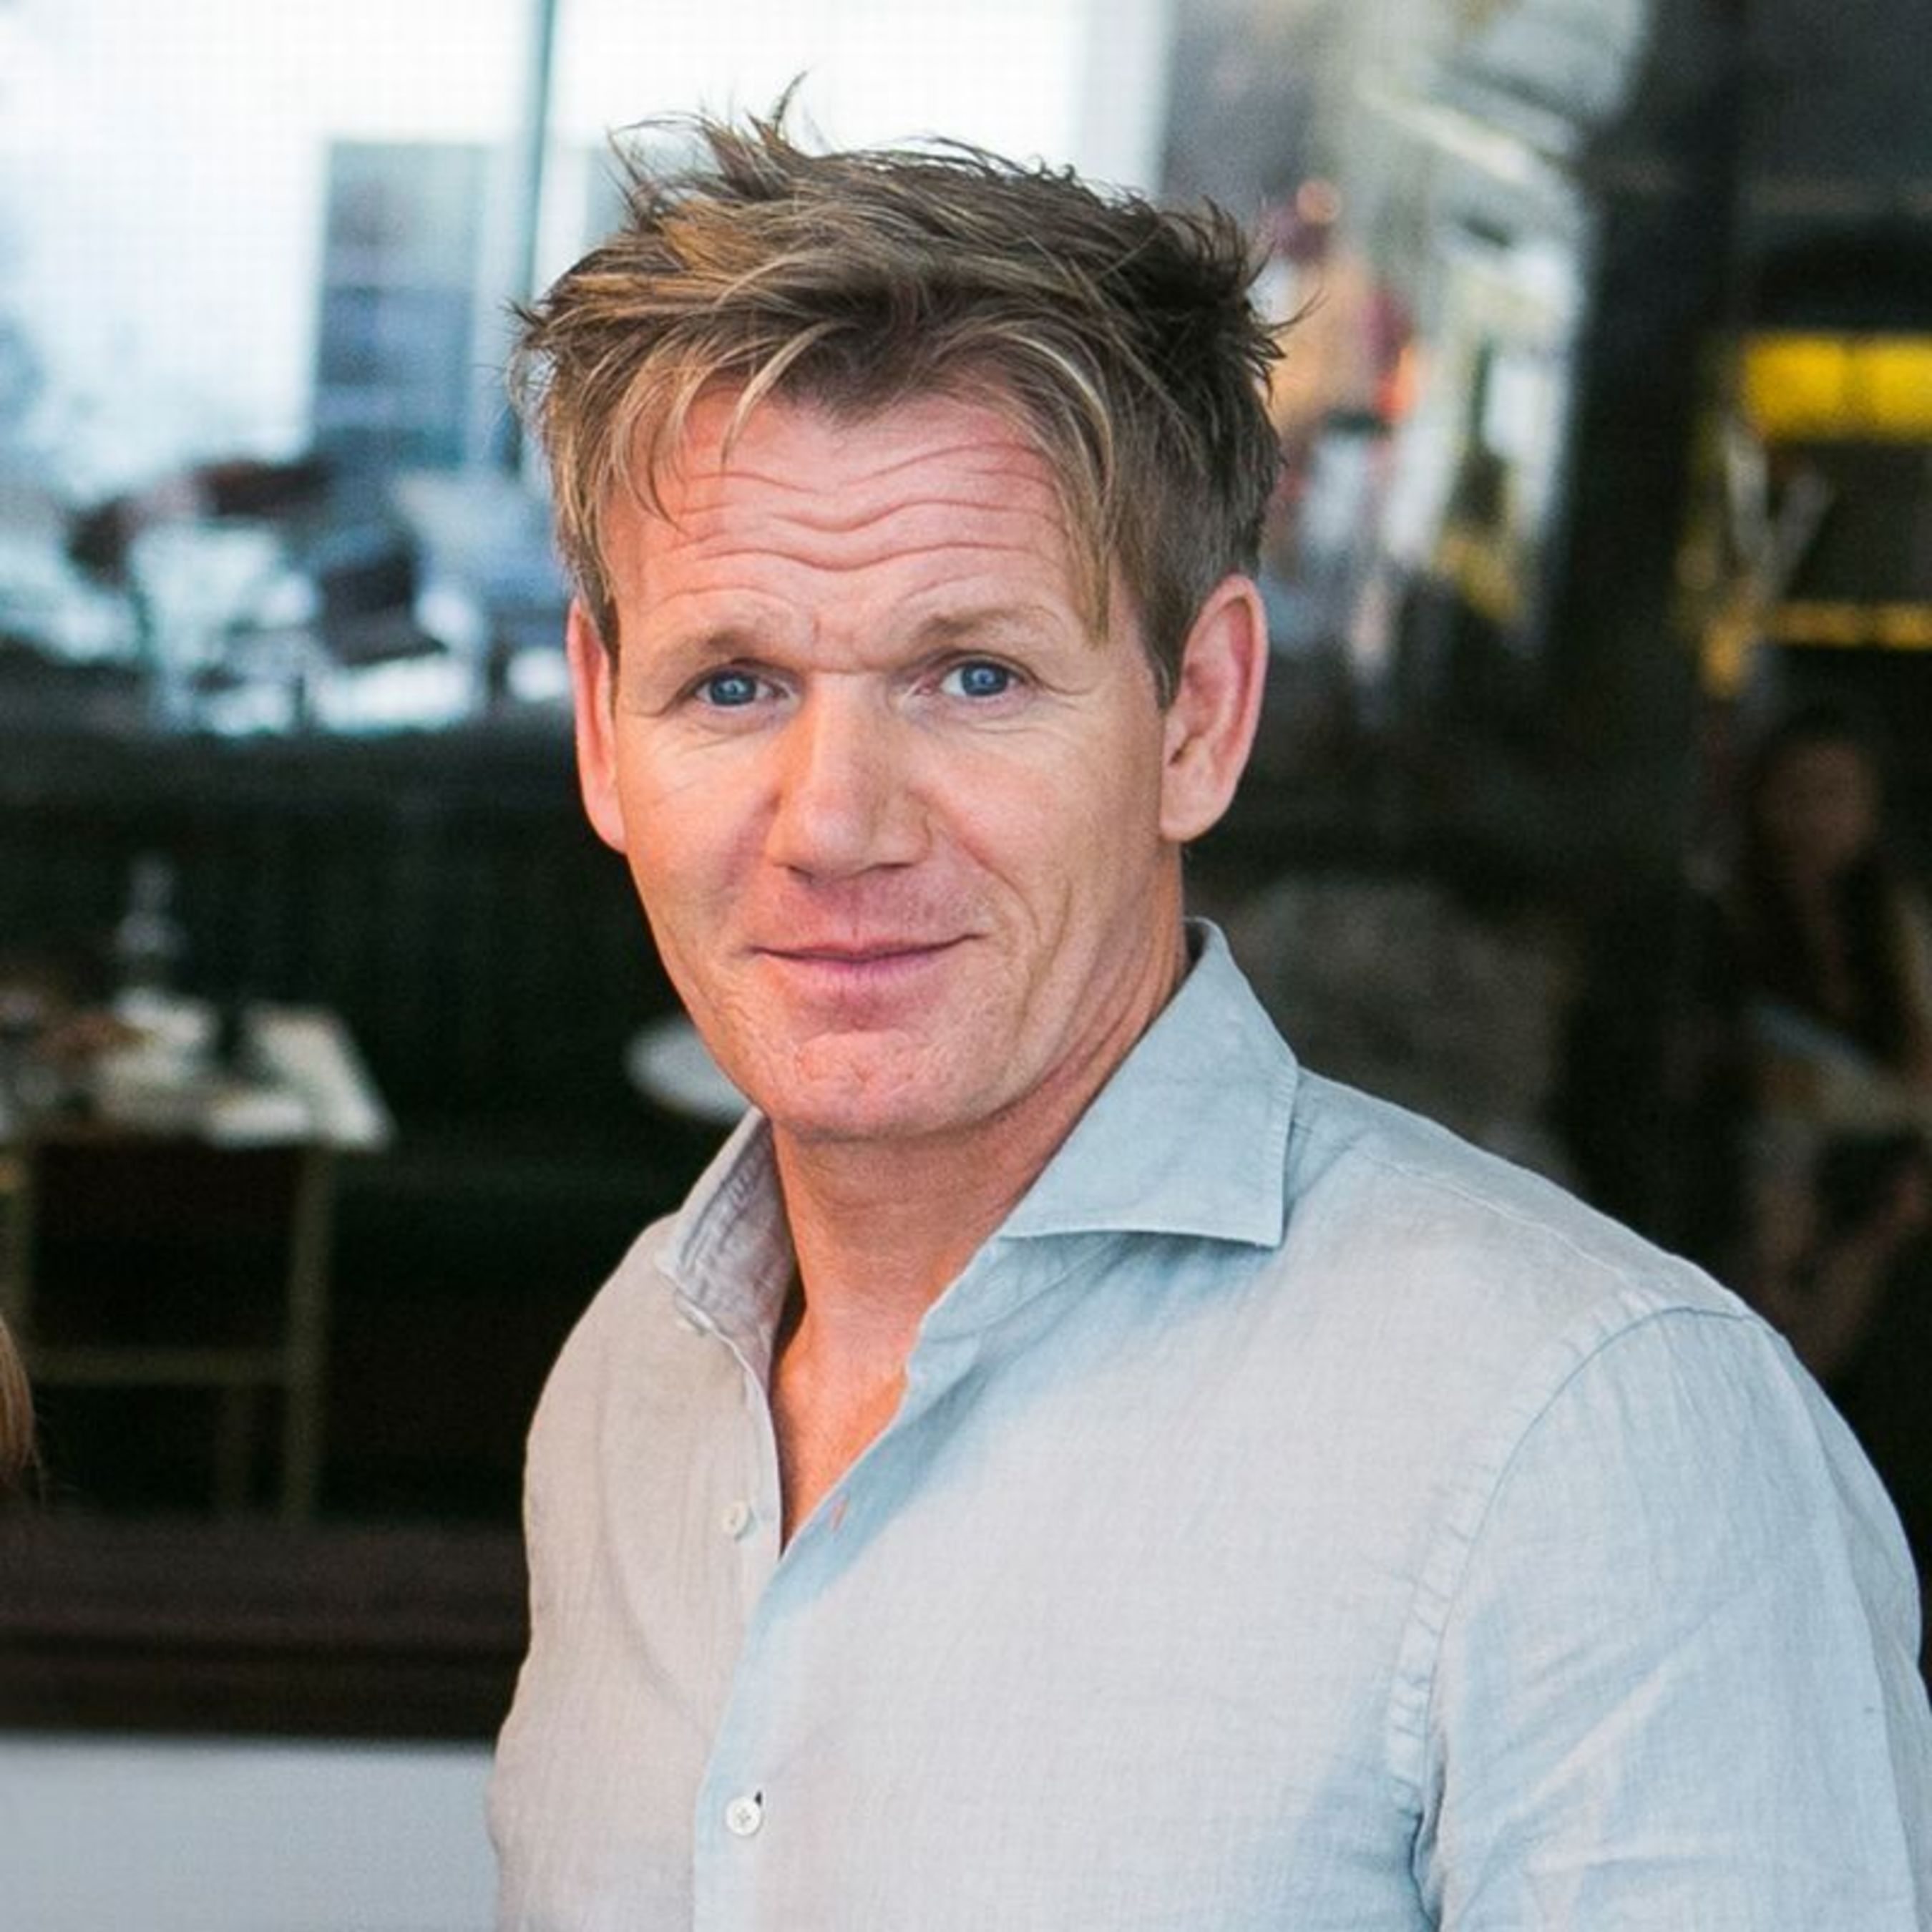 Chef, TV personality and restaurateur, Gordon Ramsay. Accredited to Piers Macdonald. (PRNewsFoto/London & Partners)